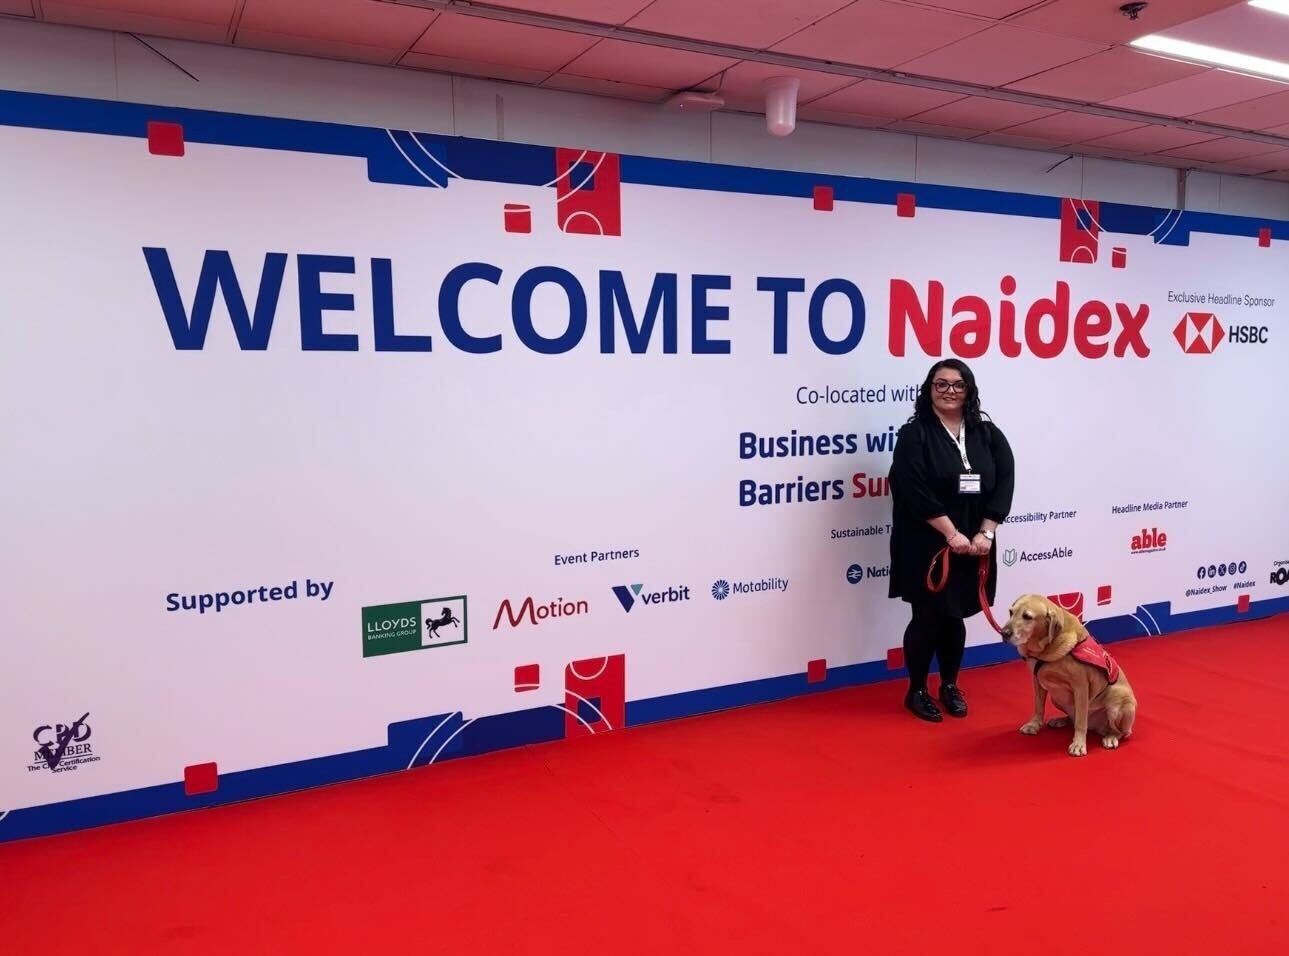 Emma Partlow, a caucasian woman with long dark hair and glasses standing on a red carpet in front of the "Welcome to Naidex" sign. Emma is smiling and holding her assistance dog Luna on a red lead.